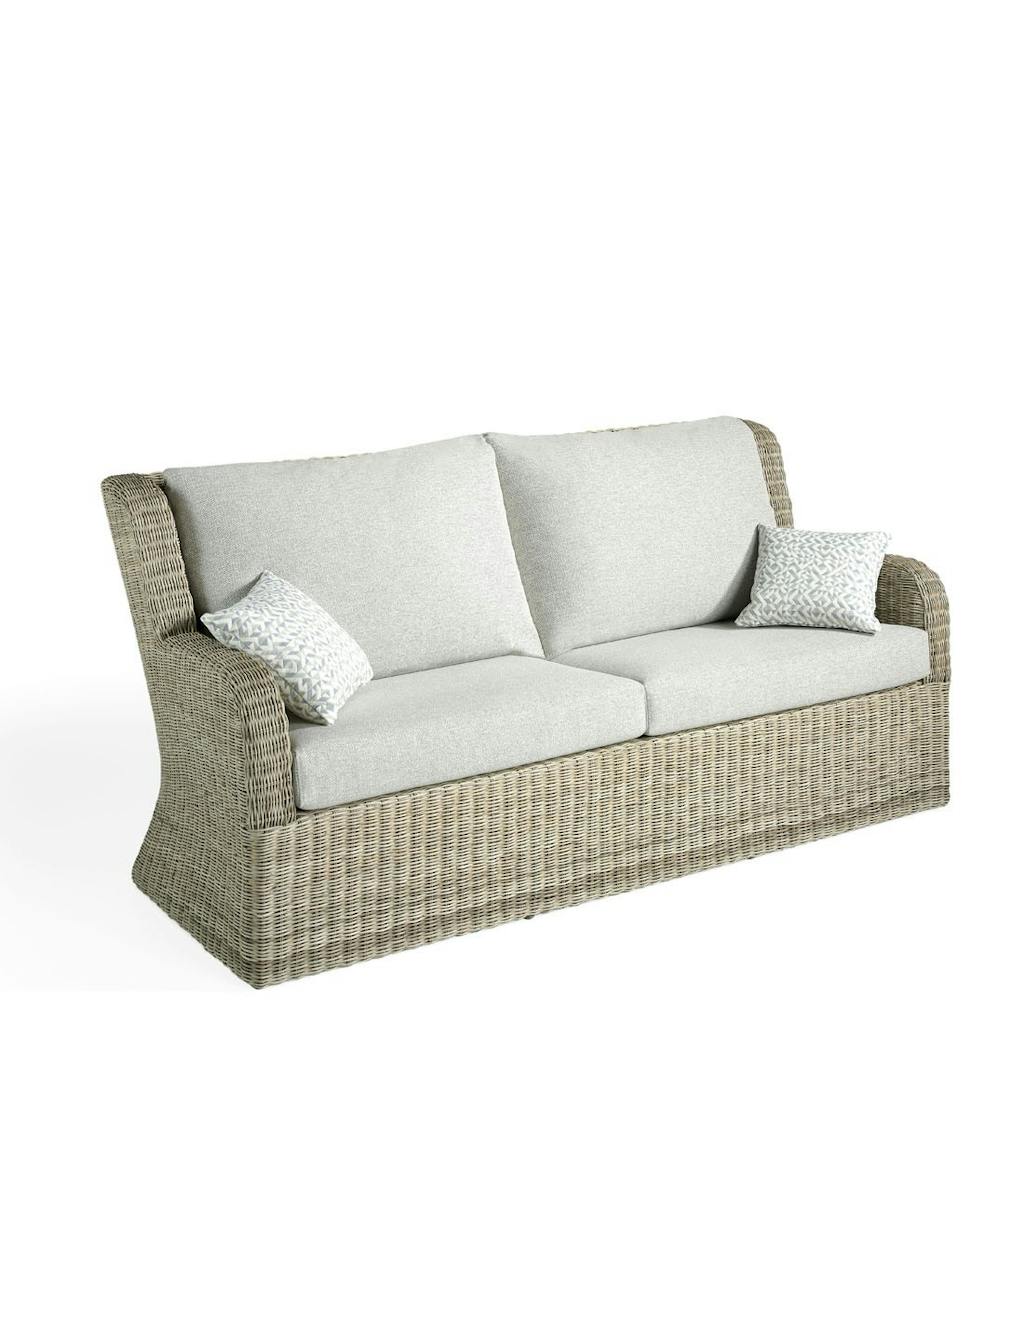  Natural  Wicker Sofa Paco Mobles